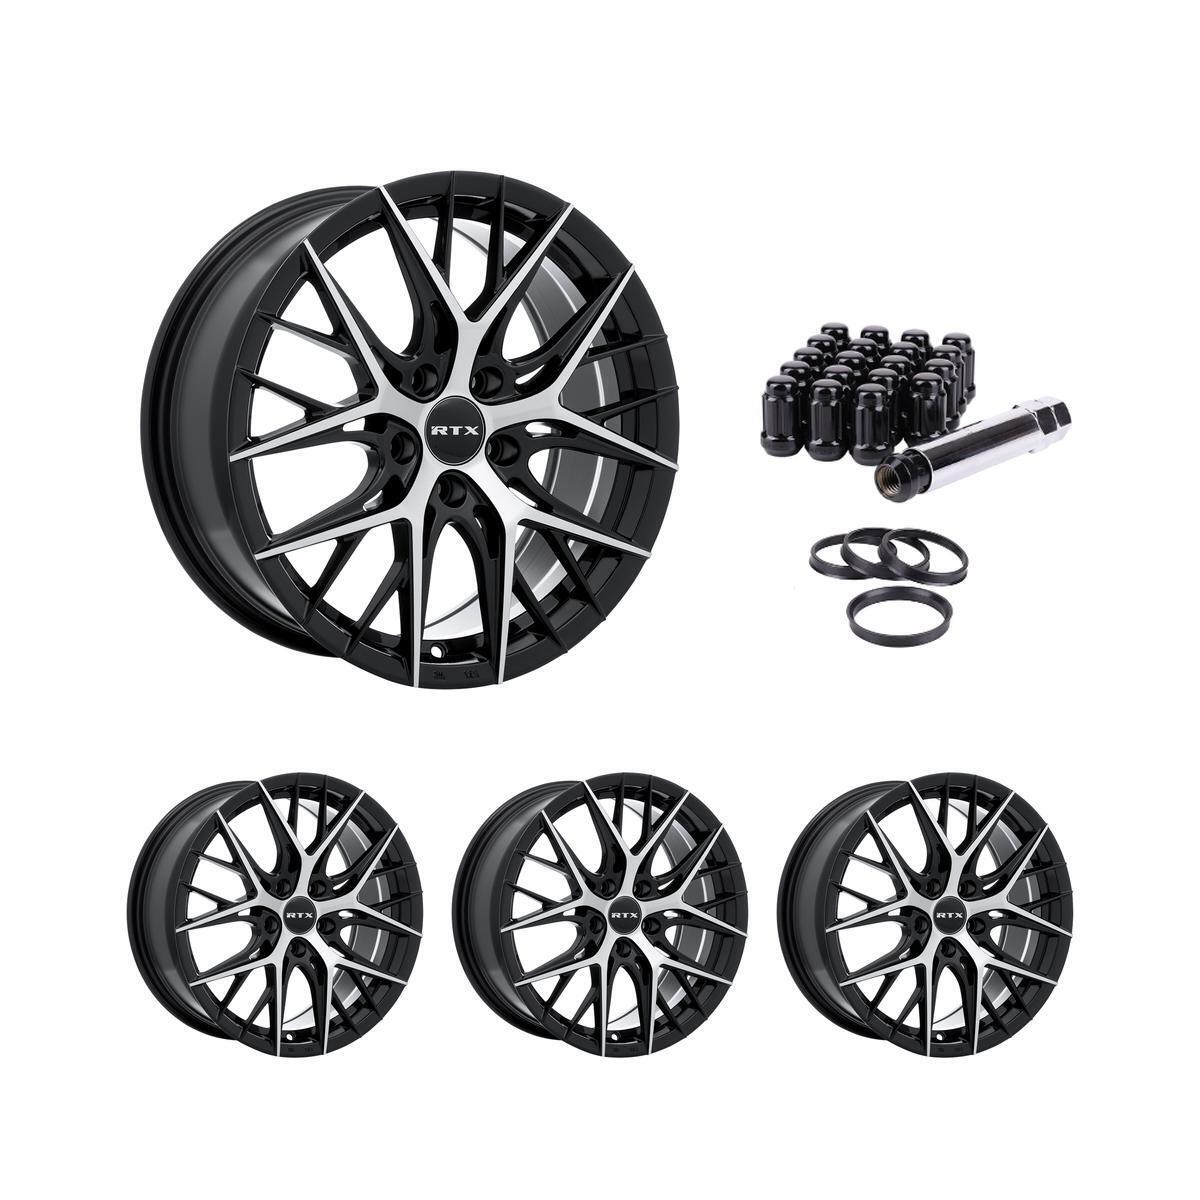 Set of 4 RTX Valkyrie Black Alloy Wheel Rims for Acura P37950 18x8 18 Inch 